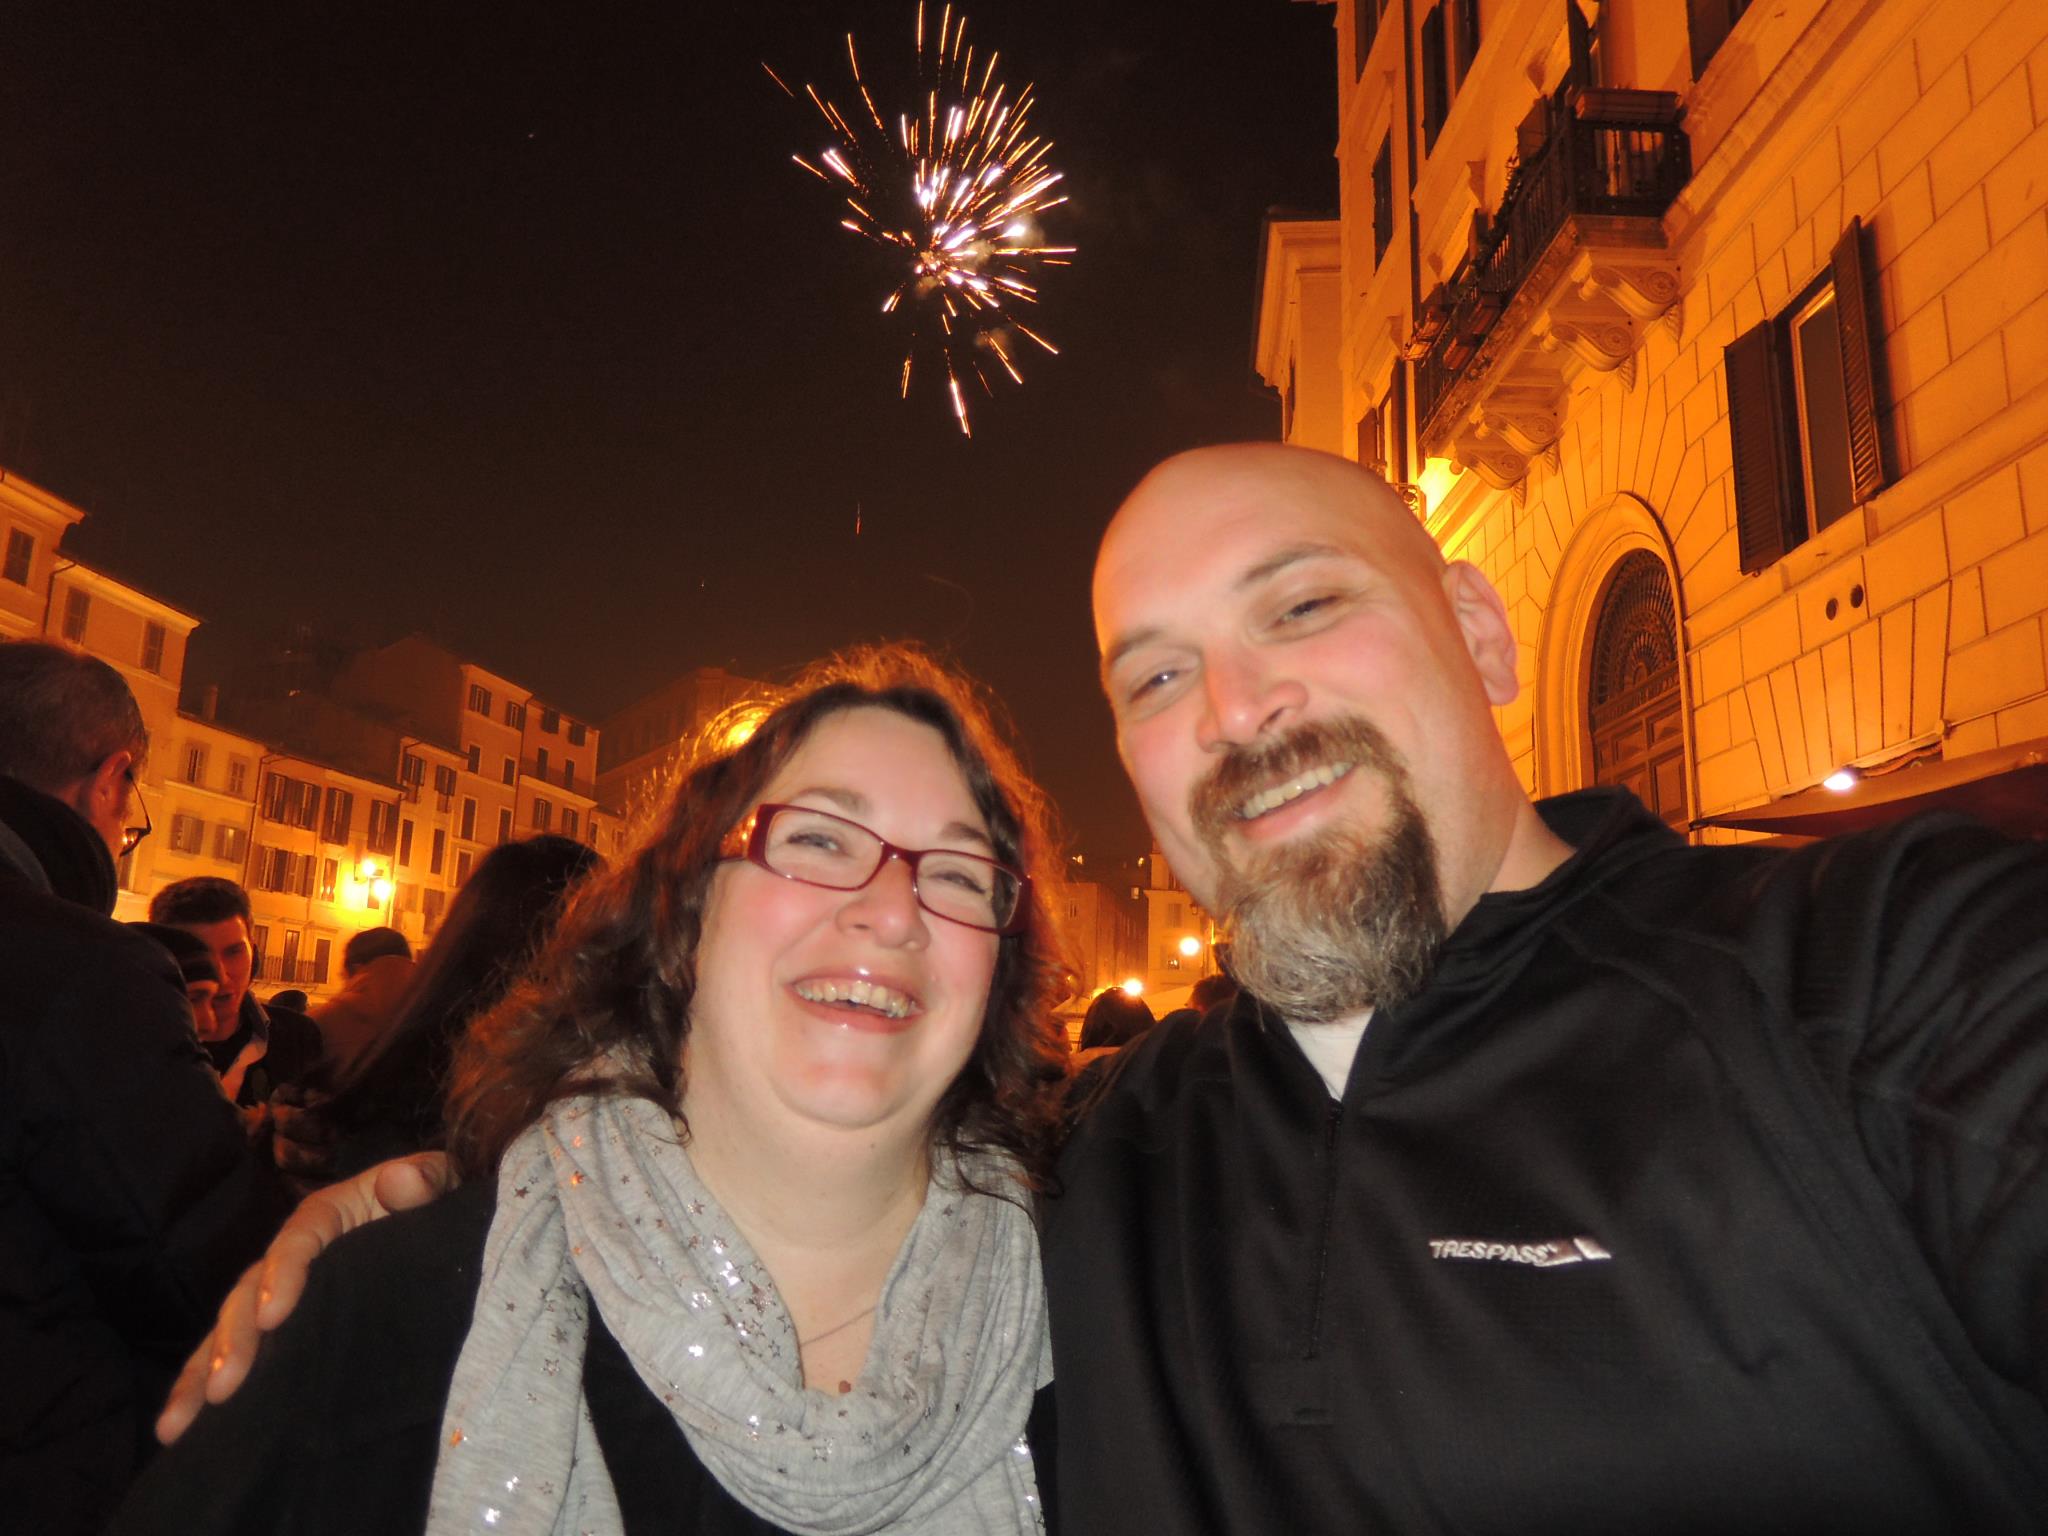 Two people in front of fireworks in the background.